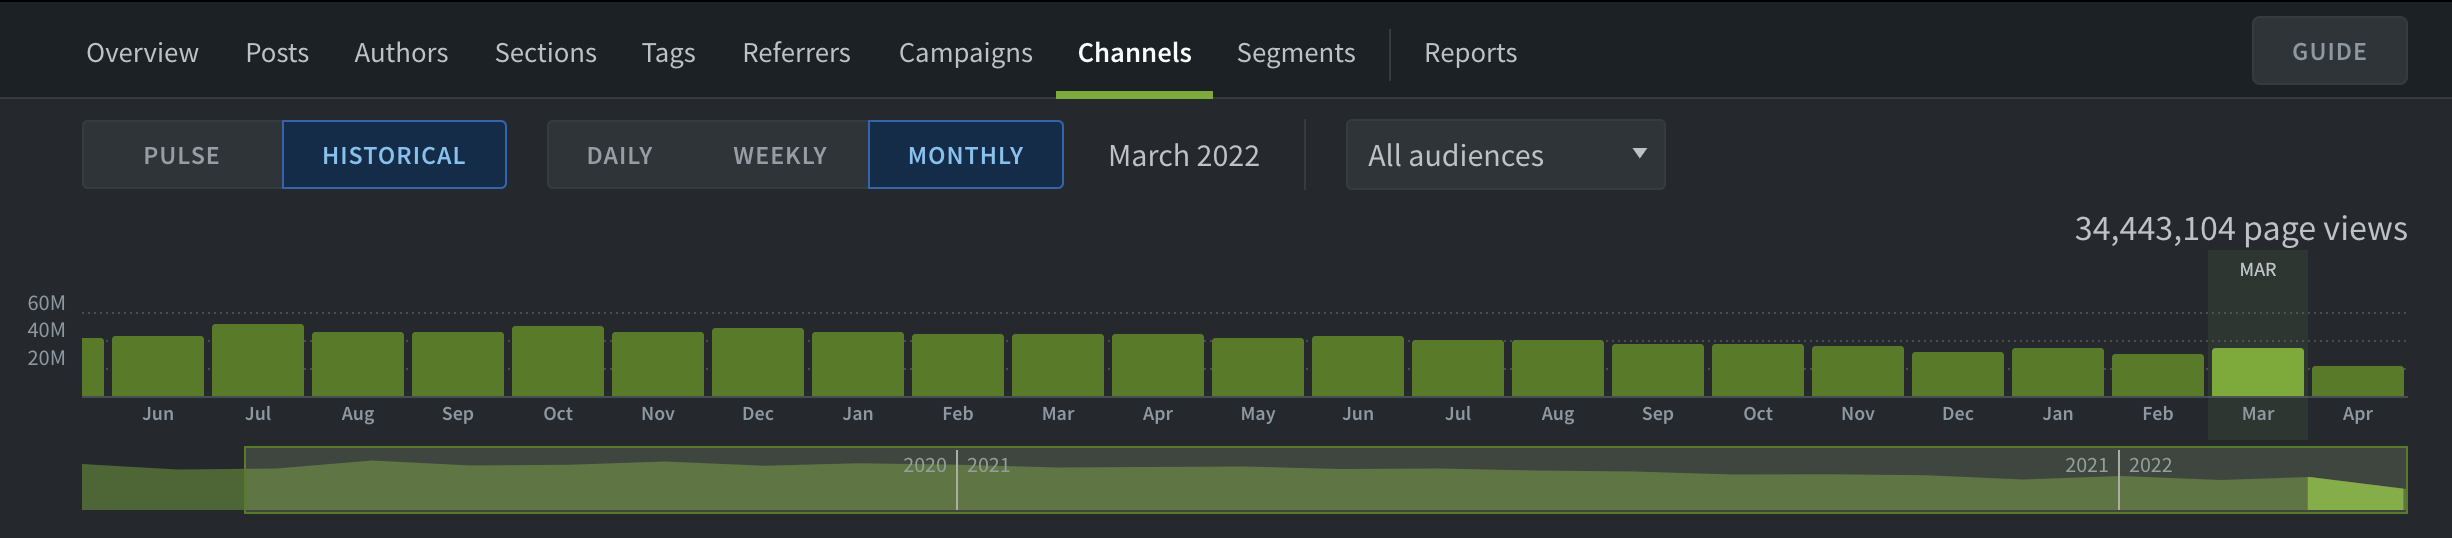 Channels graph view in new dark mode with higher contrasting green colors